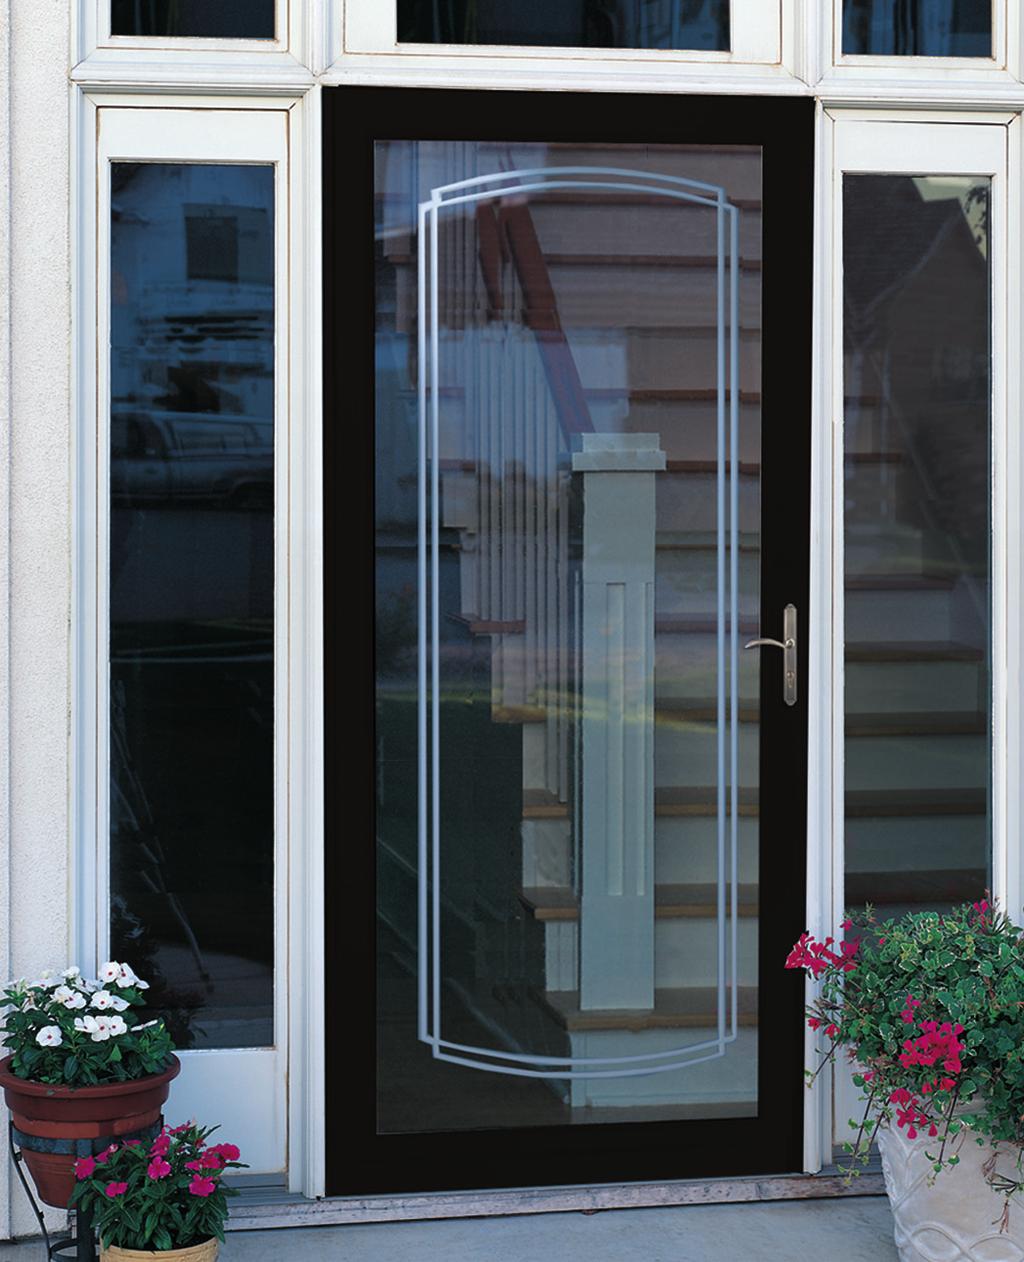 First Impressions Interchangable Screen Secure Elegance Security Door AVAILABLE COLORS AVAILABLE COLORS Almond BUYER S GUIDE Sandstone Brown Green 5 Cranberry Black FOR MORE INFORMATION SEE PAGE 12»